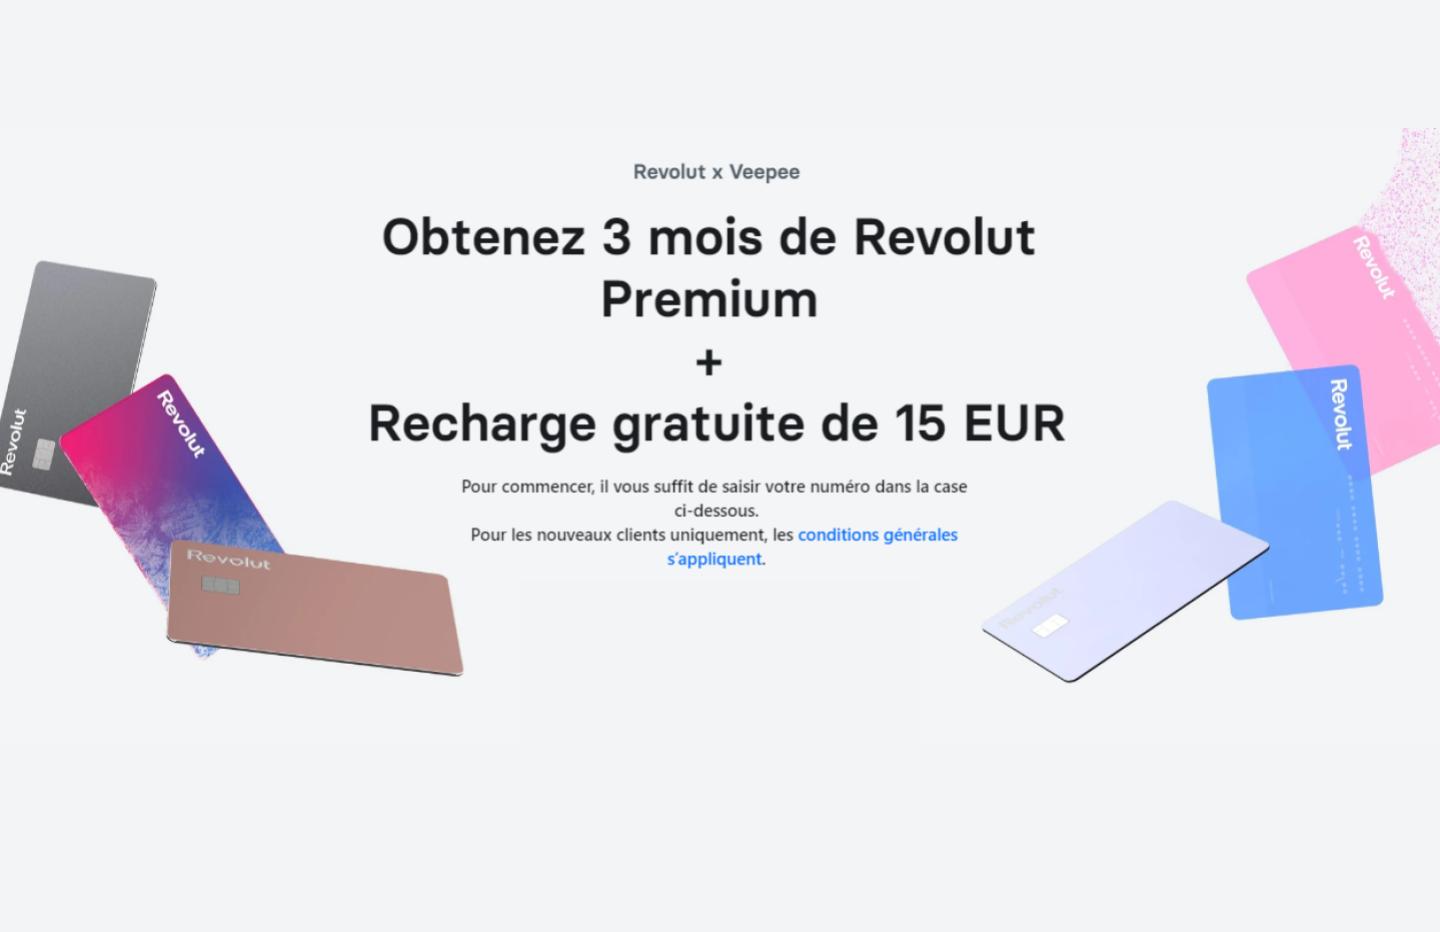 Revolut offers you 3 months of Premium card + €15 free recharge